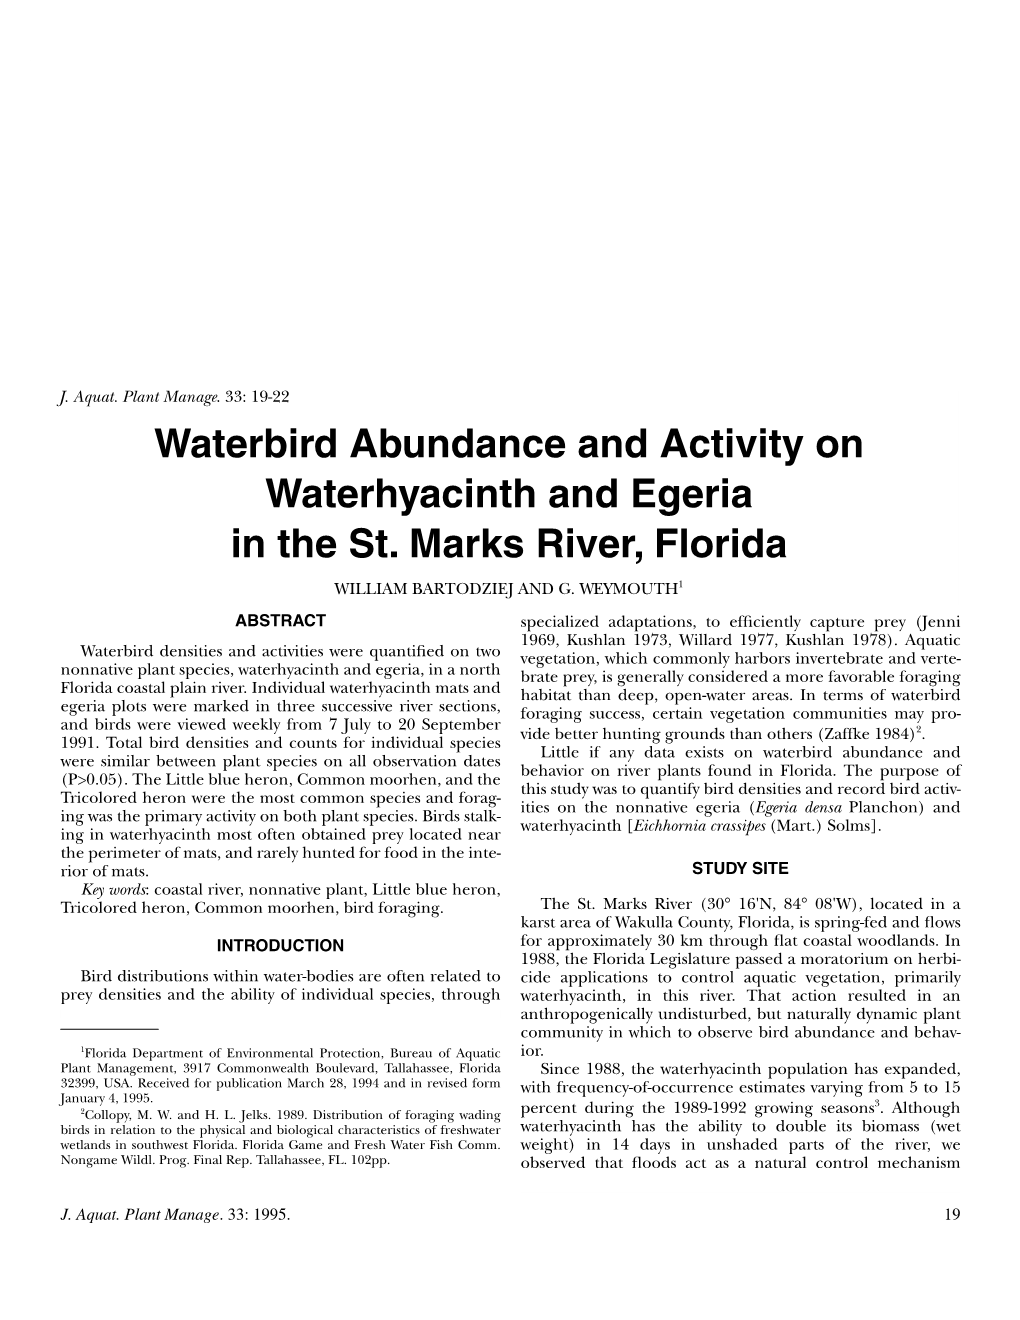 Waterbird Abundance and Activity on Waterhyacinth and Egeria in the St